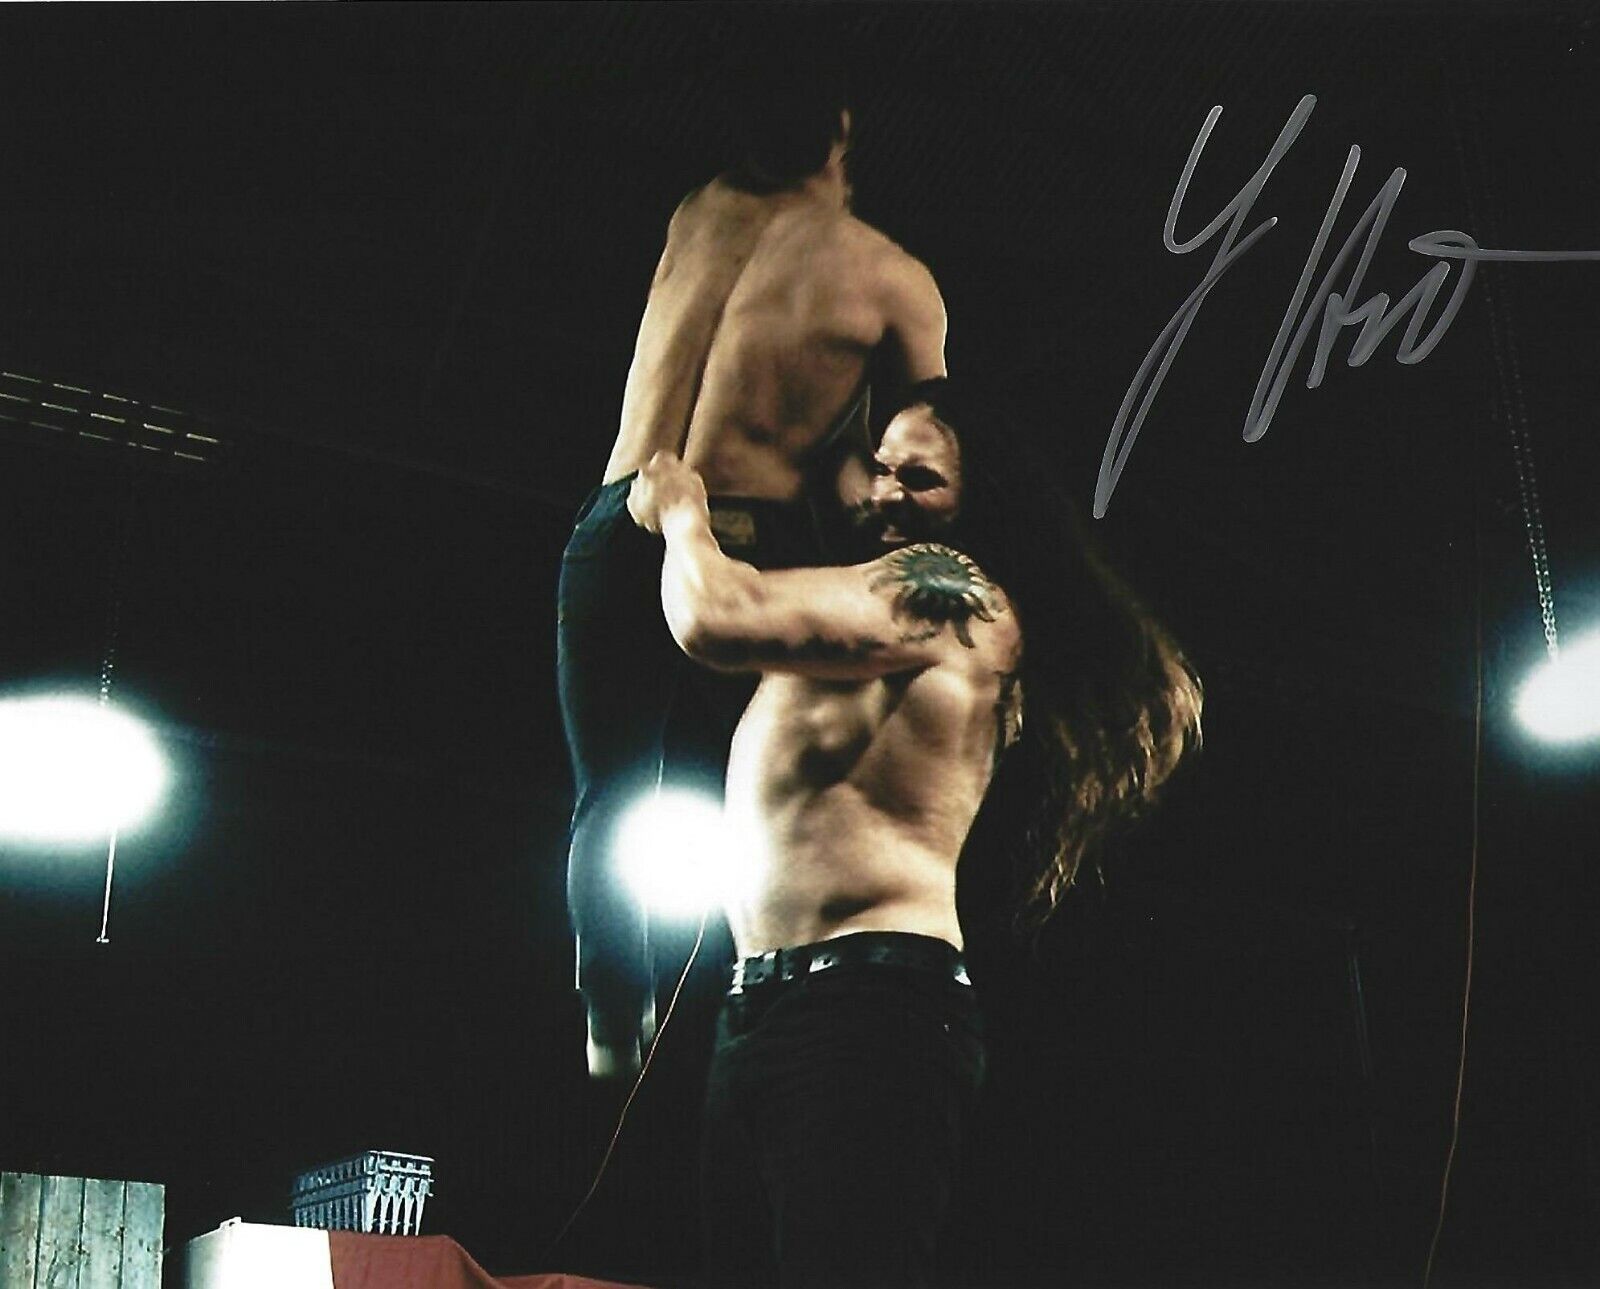 Lance Archer Signed 8x10 Photo Poster painting New Japan Pro Wrestling Picture Autograph KES 2